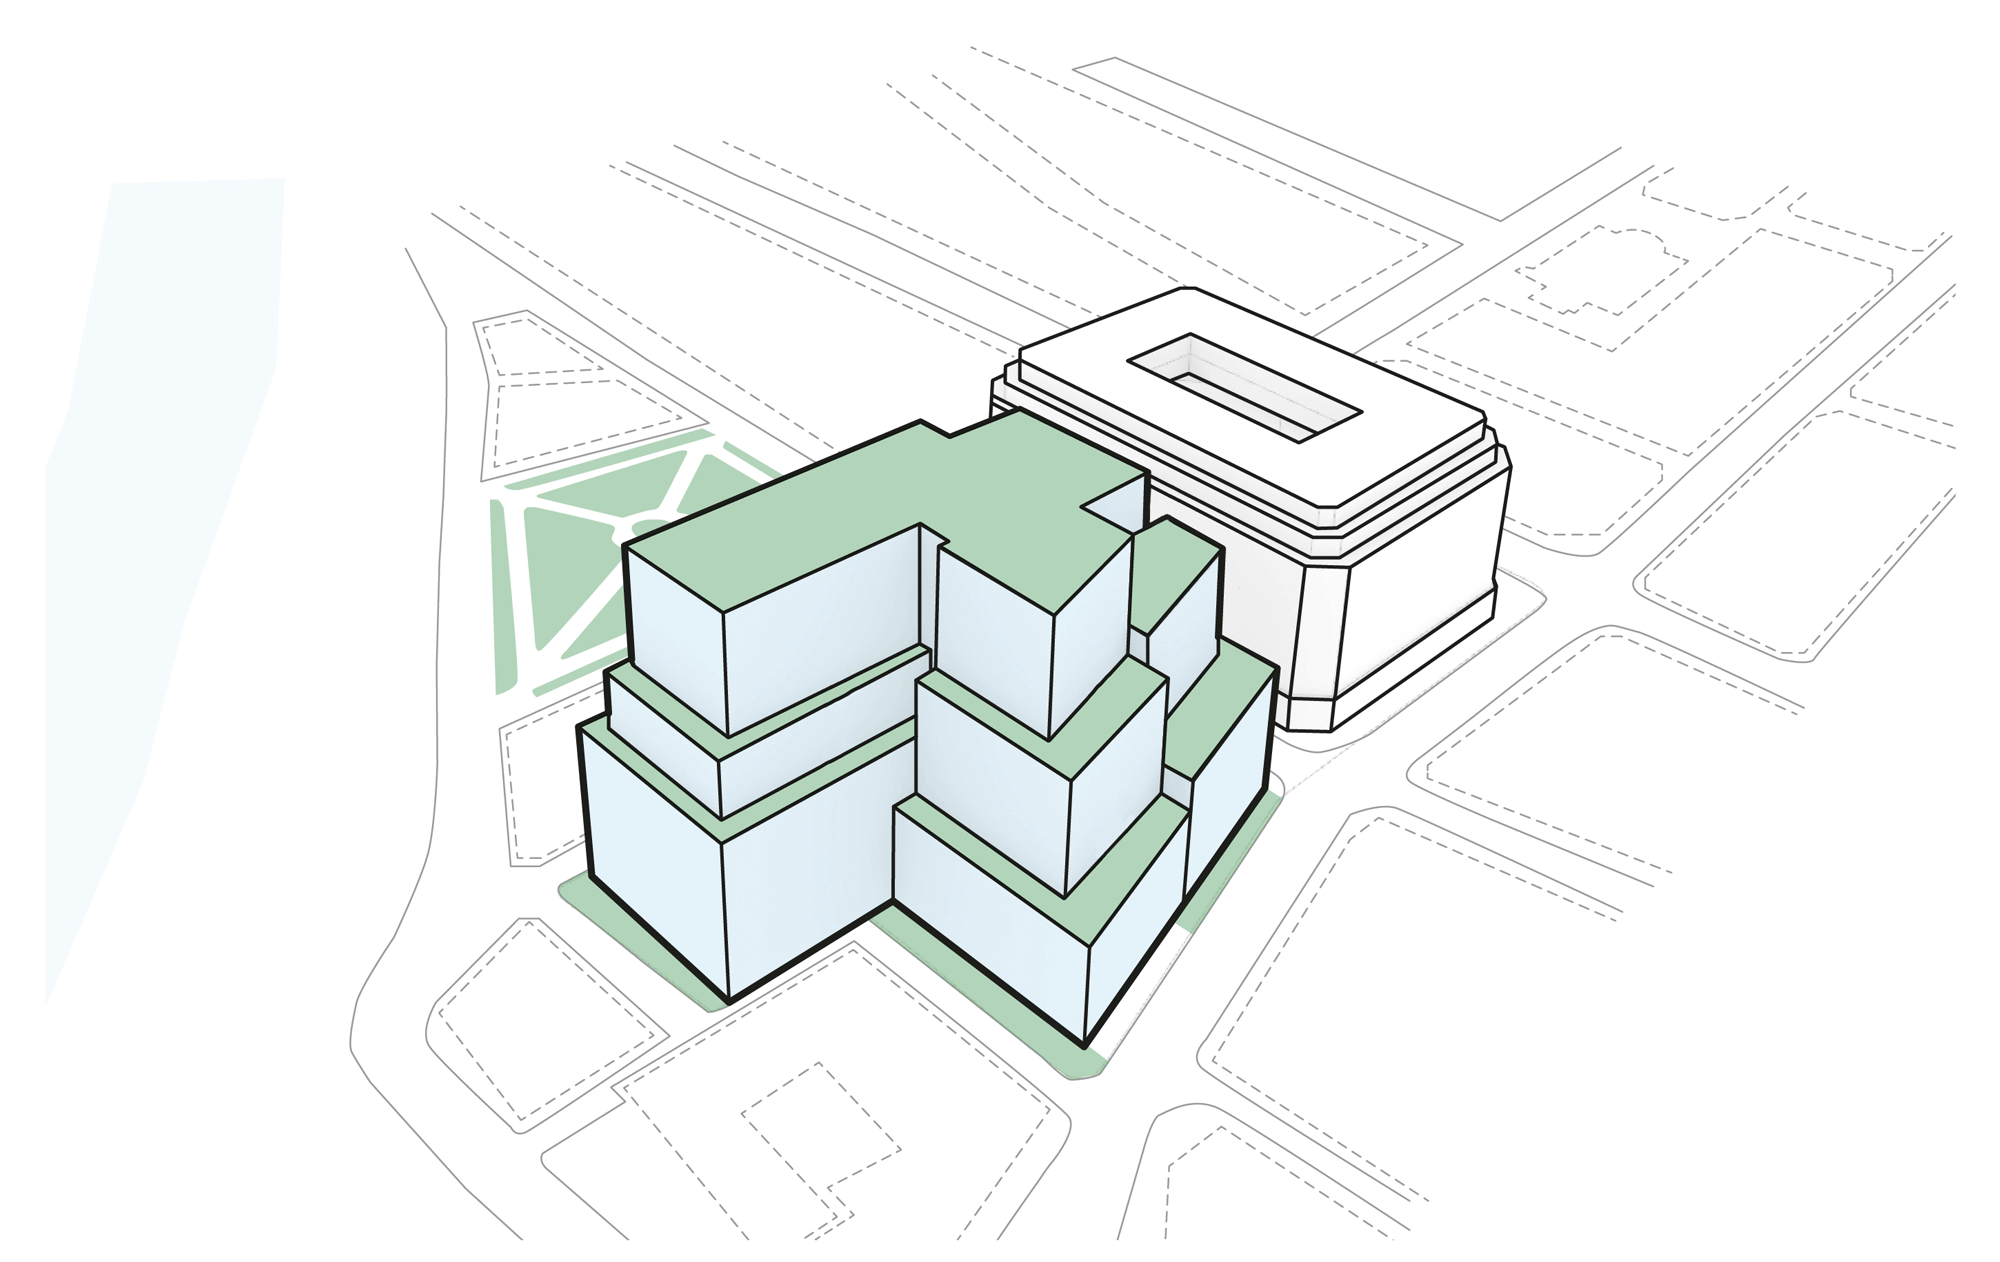 Developing the massing of the new office building by extruding the site, introducing datums and stepped terraces